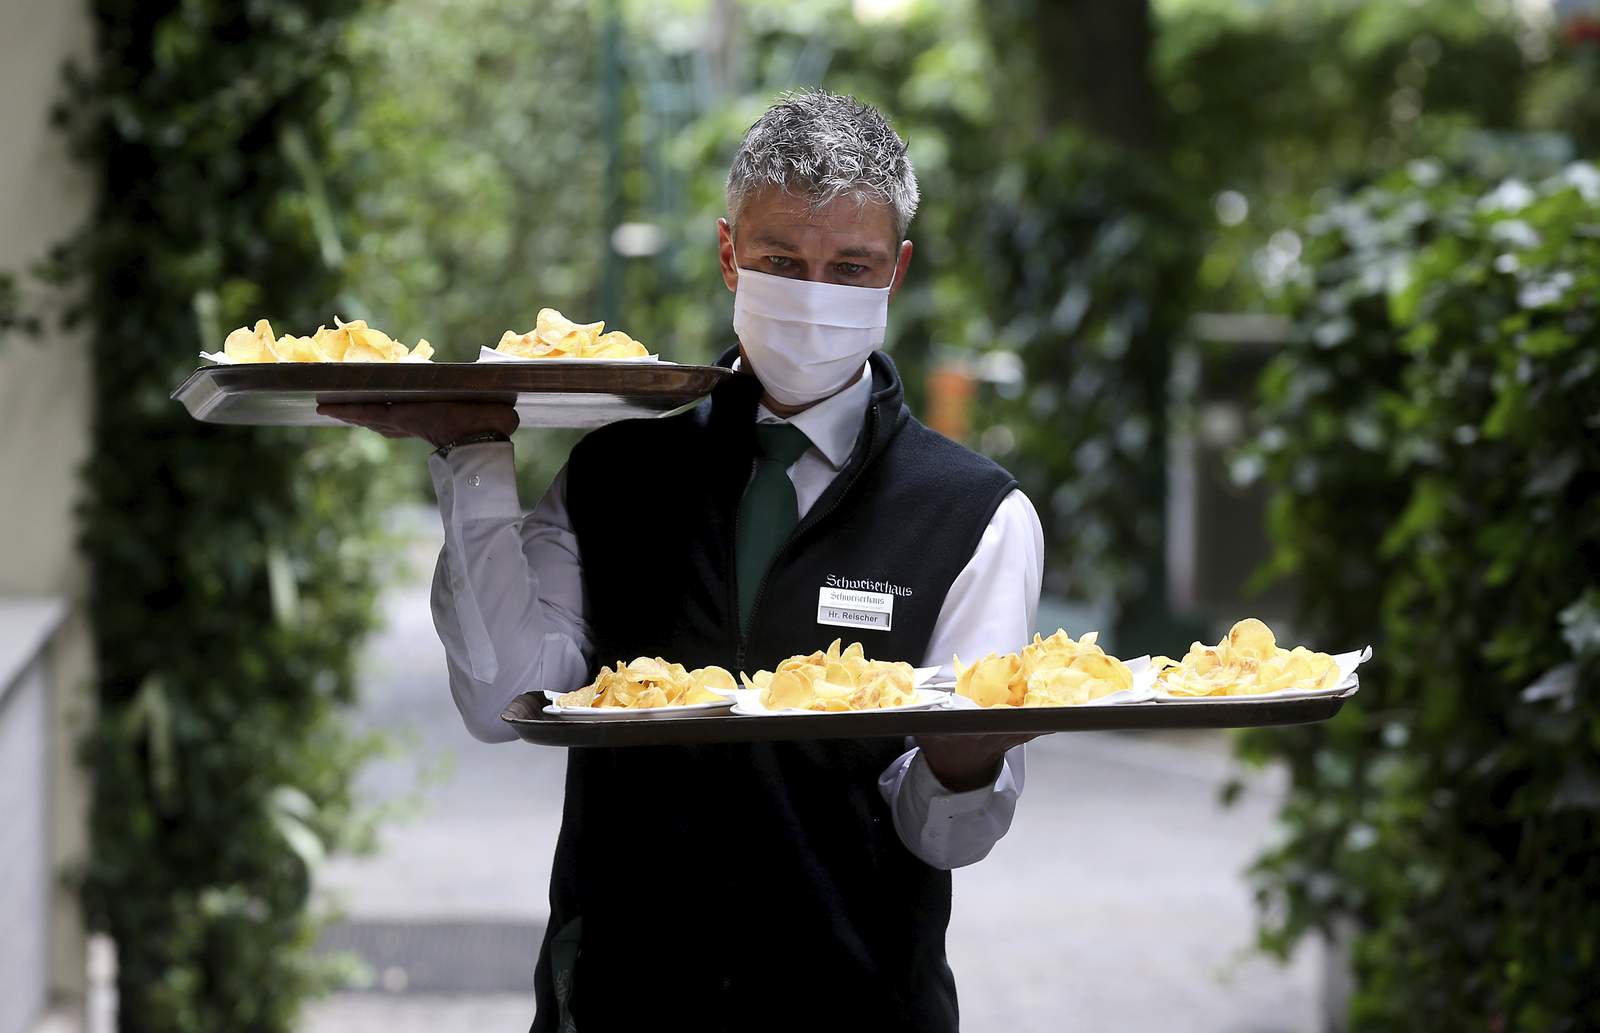 Ask 2: Are restaurant employees in Harris County required to wear masks?